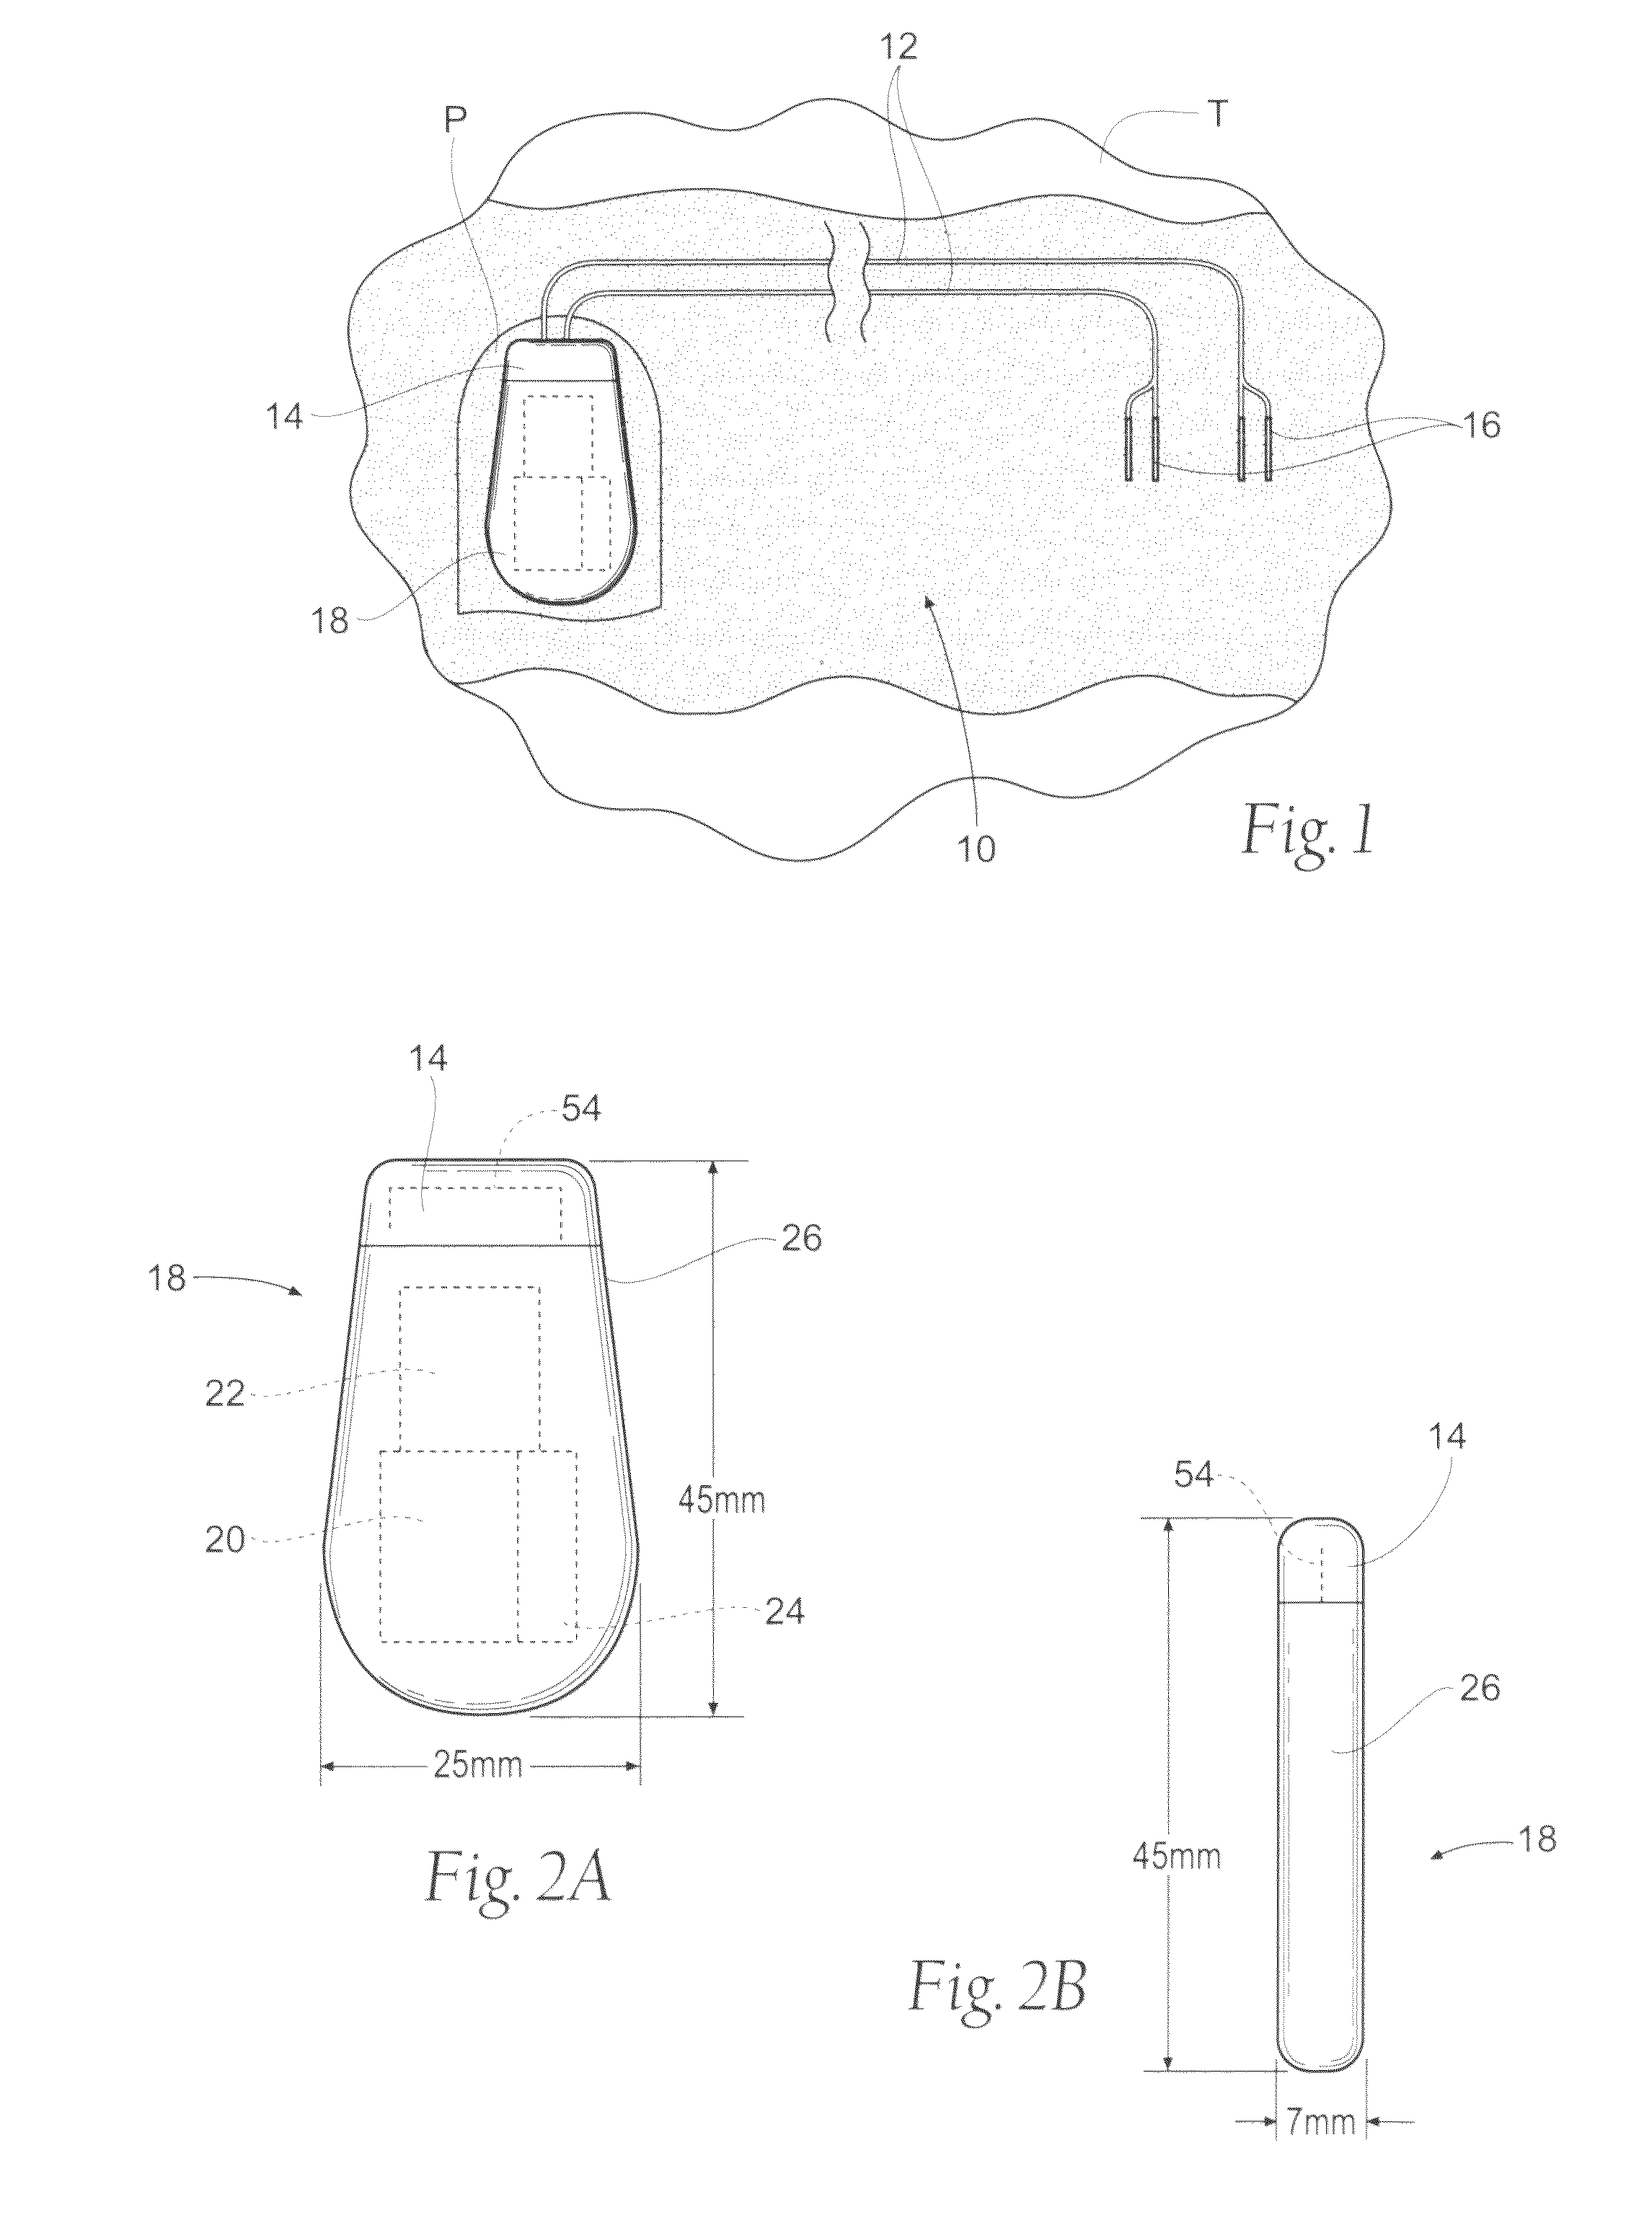 Implantable systems and methods for acquisition and processing of electrical signals